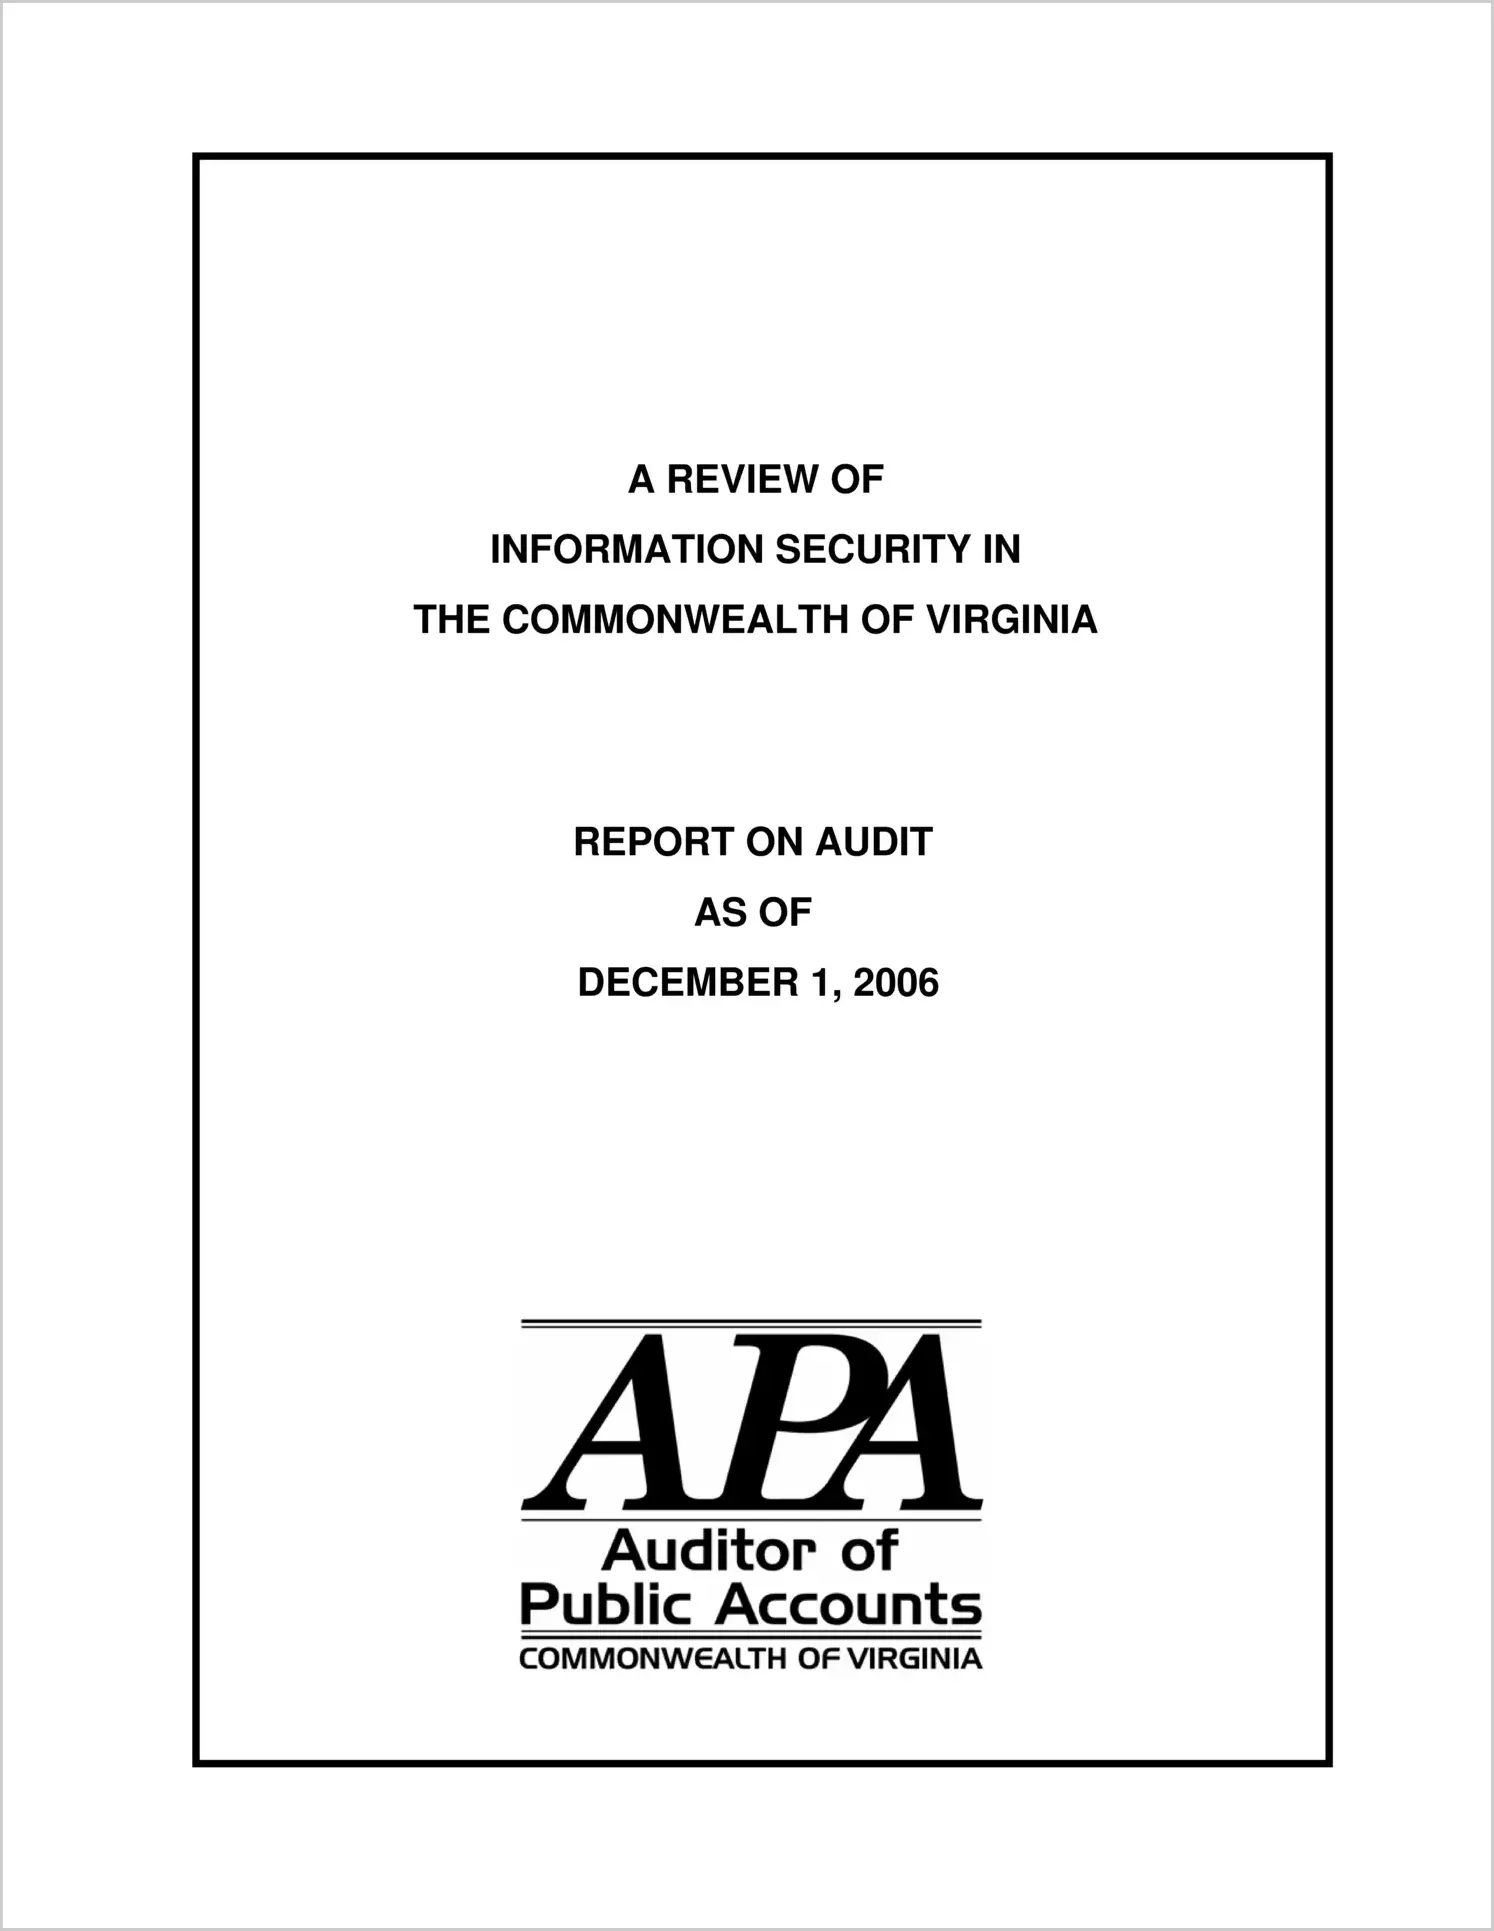 Review of Information Security In The Commonwealth of Virginia as of December 1, 2006